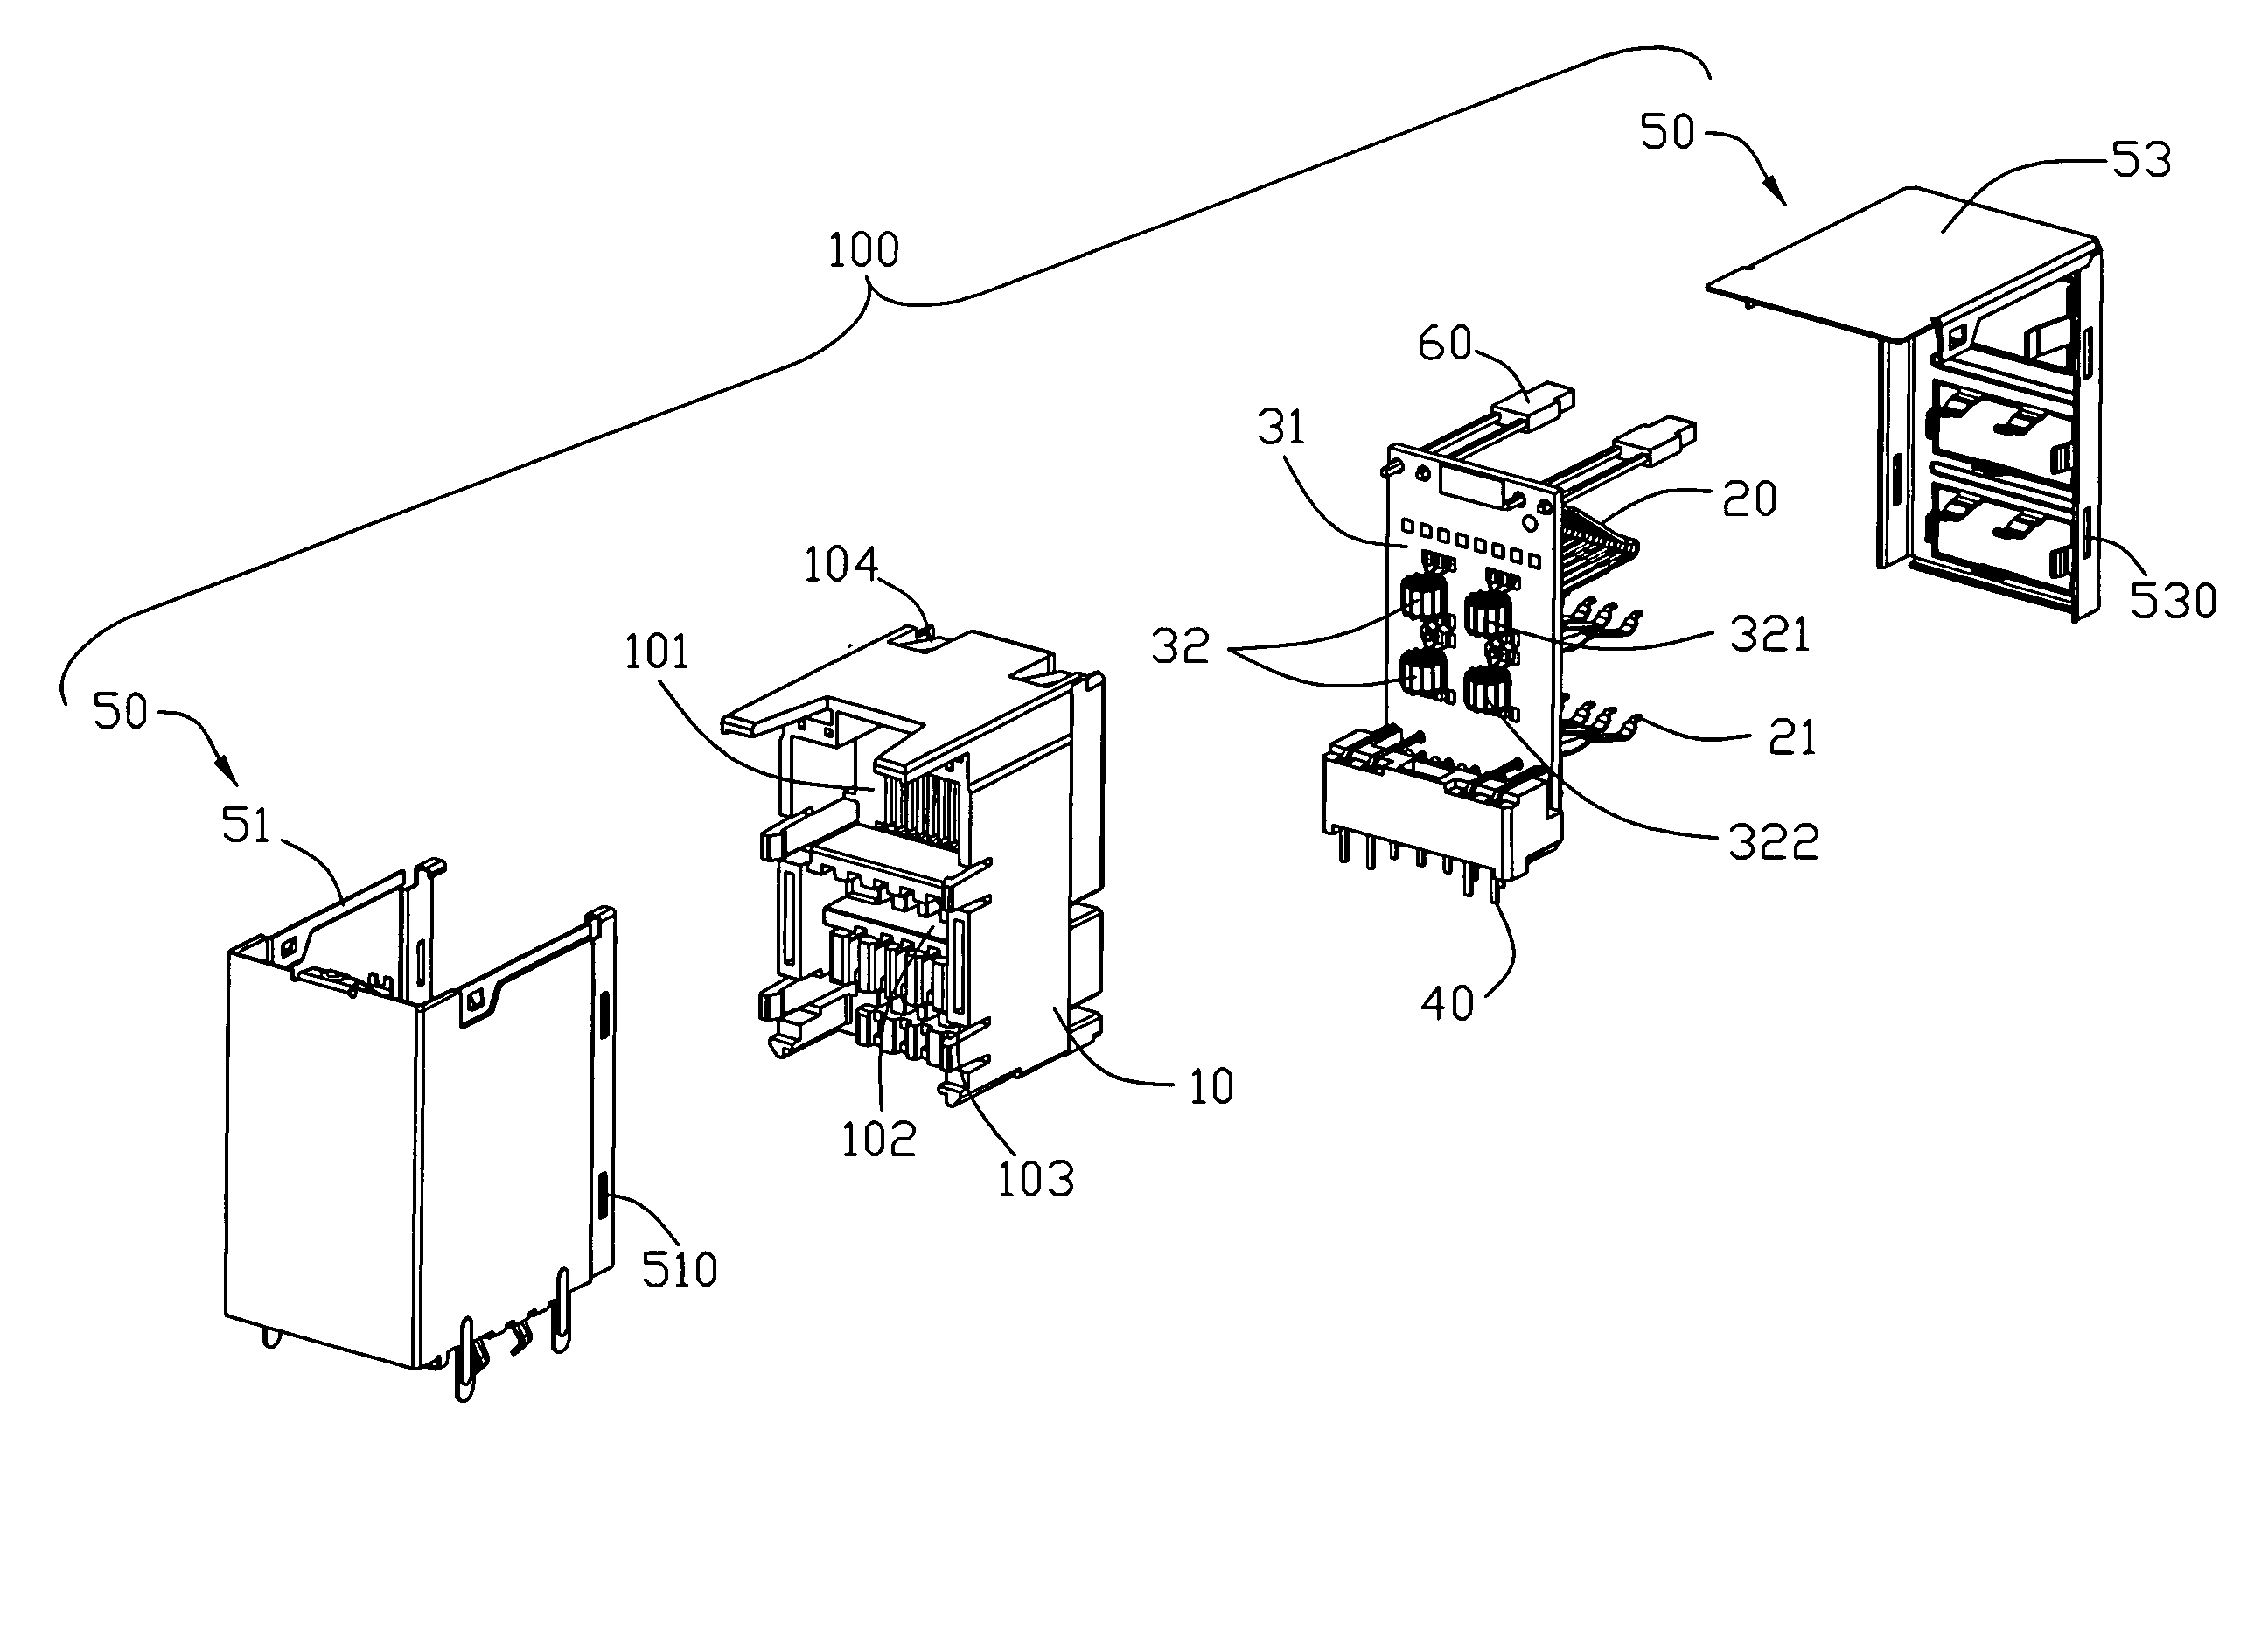 Electrical connector having an improved magnetic module